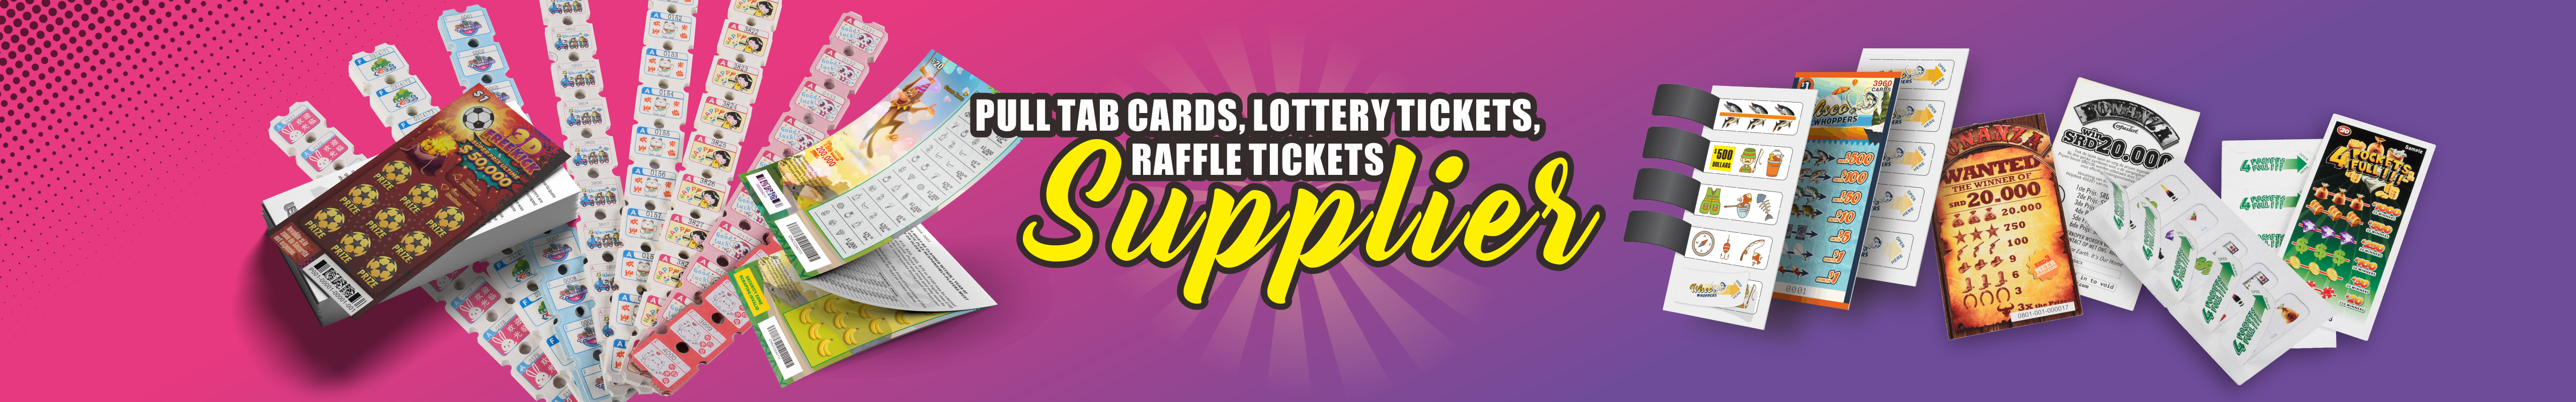 Scratch Card | Lottery Tickets | Pull Tab Ticket | Seal Cards